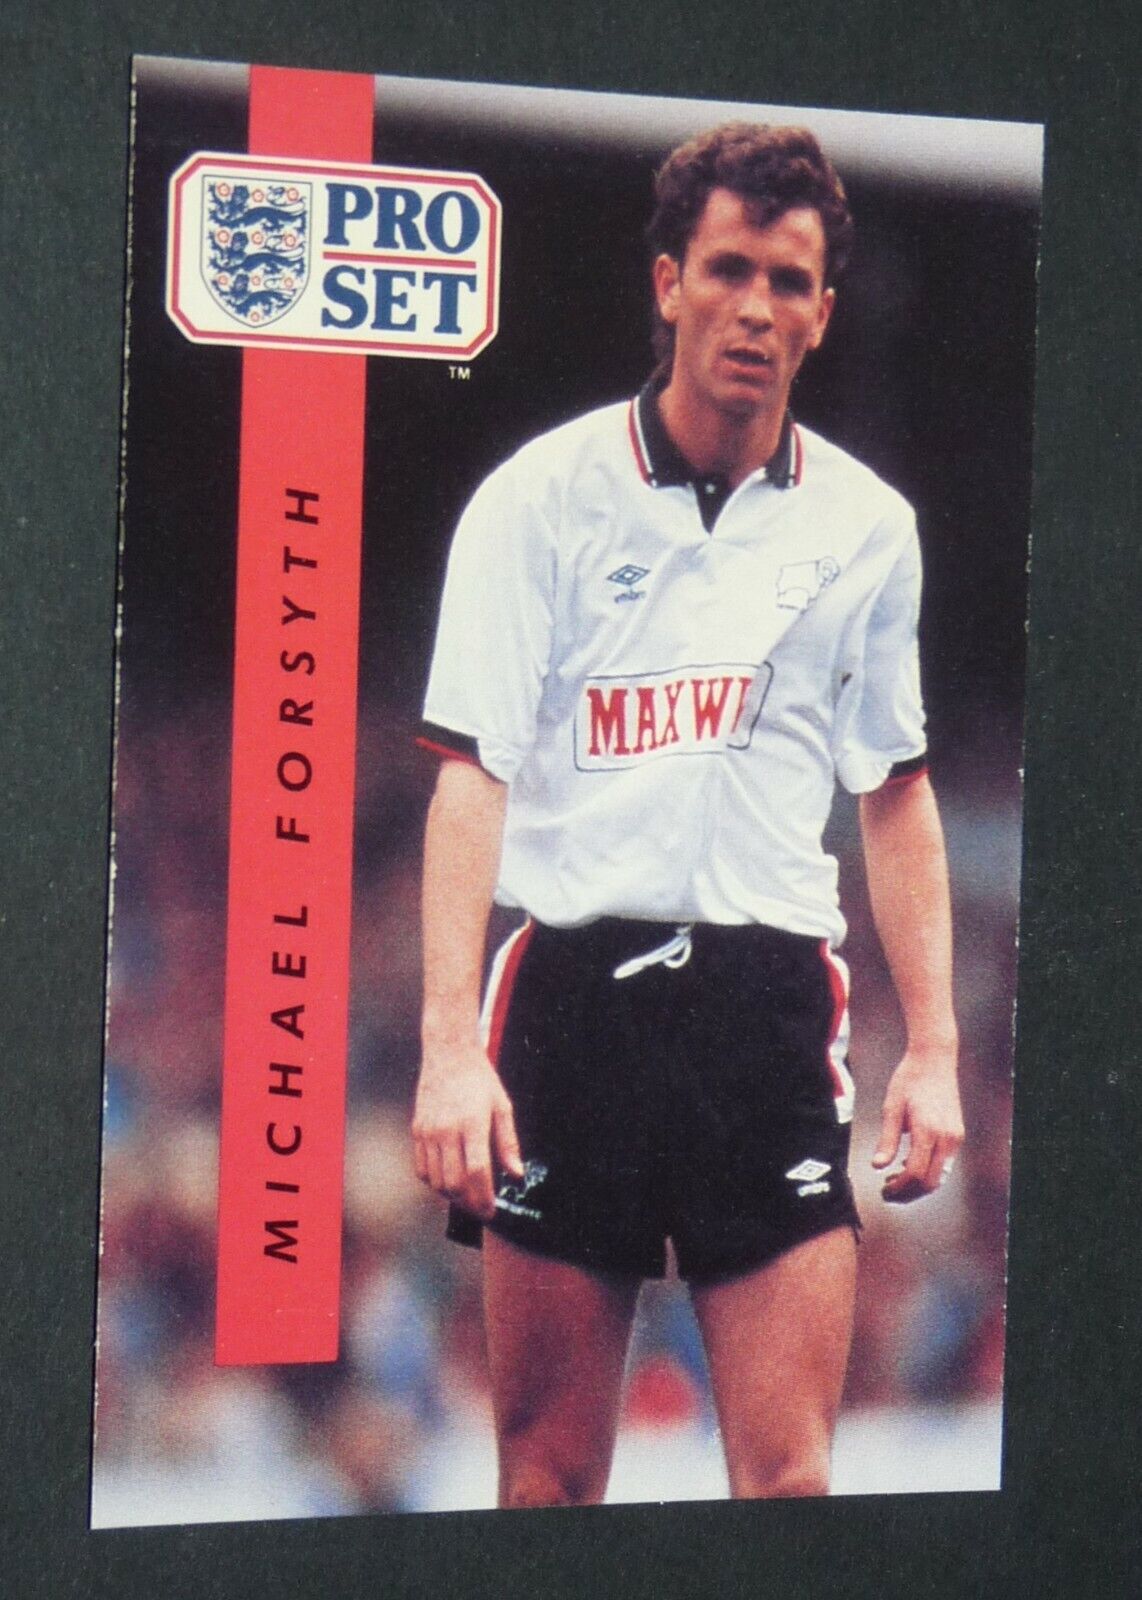 #67 MICHAEL FORSYTH DERBY COUNTY RAMS FOOTBALL CARD PRO SET 1 DIVISION 1990-1991